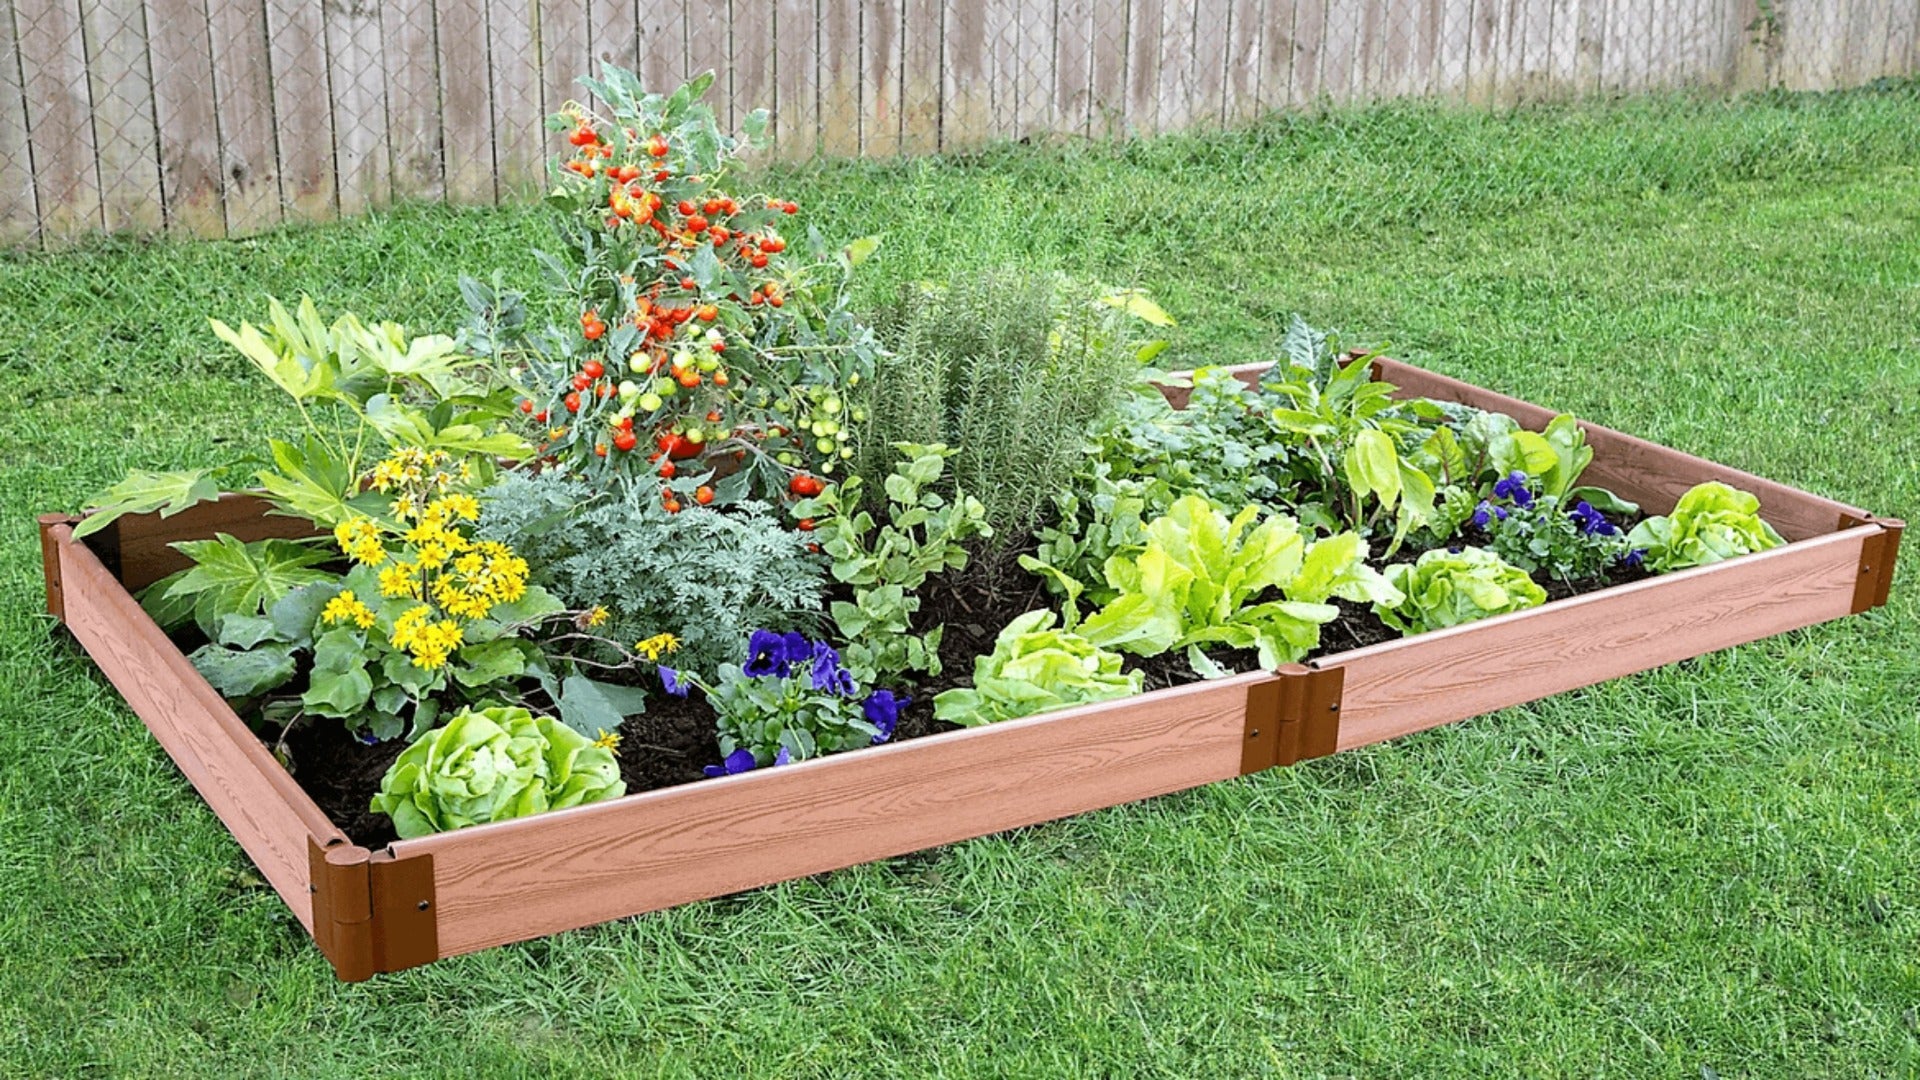 Tool-Free 4' x 8' Raised Garden Bed Raised Garden Beds Frame It All Classic Sienna 1'' 1